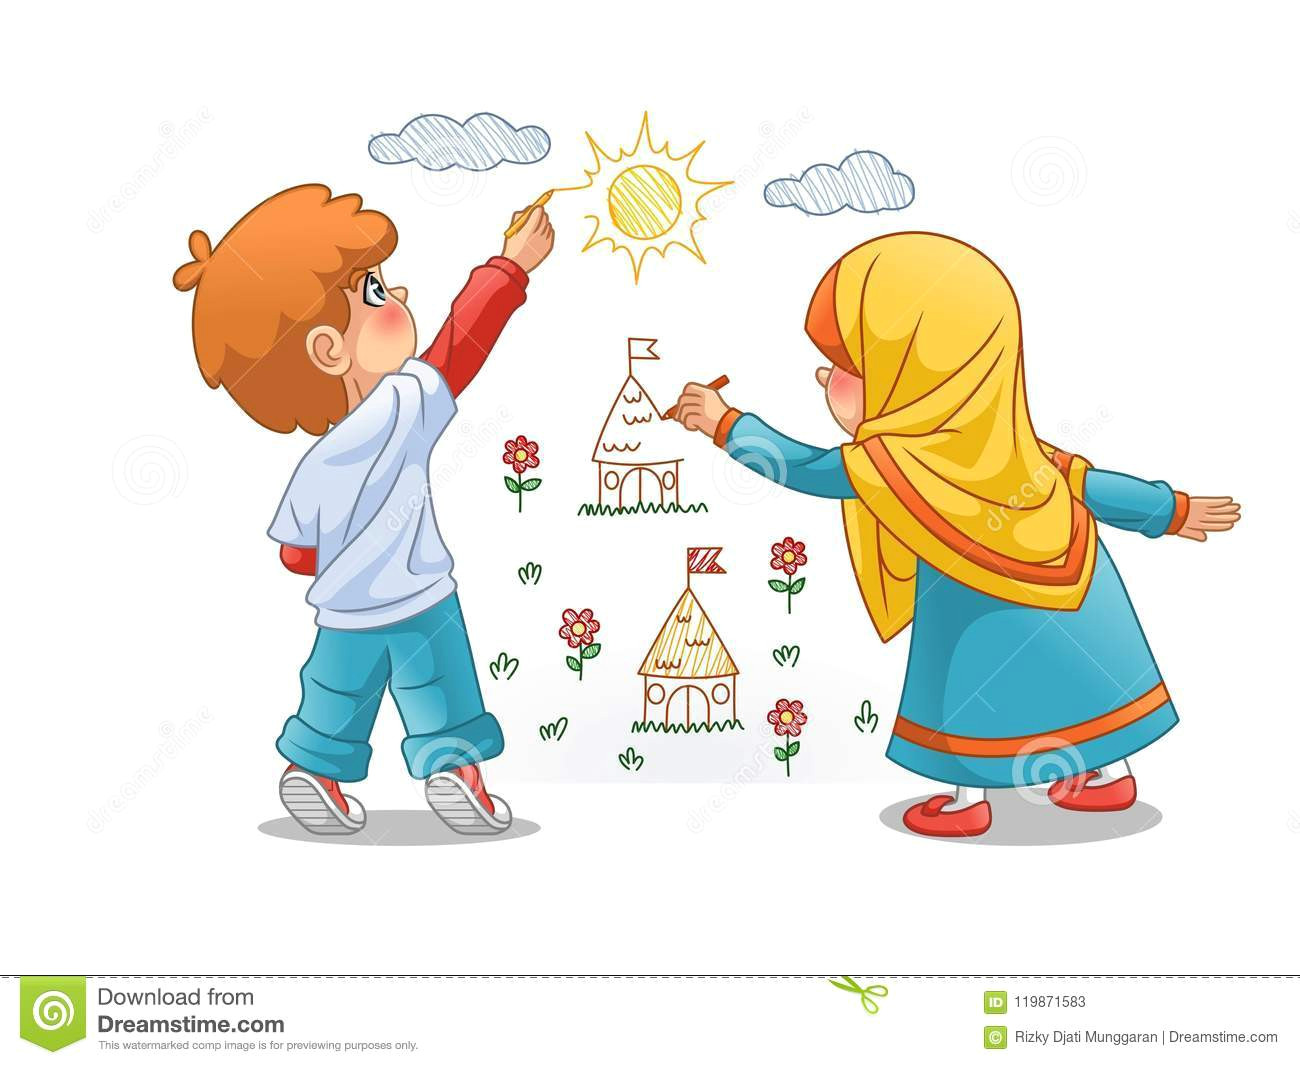 muslim girls and boy draw landscapes on the walls cartoon character design vector illustration isolated against white background